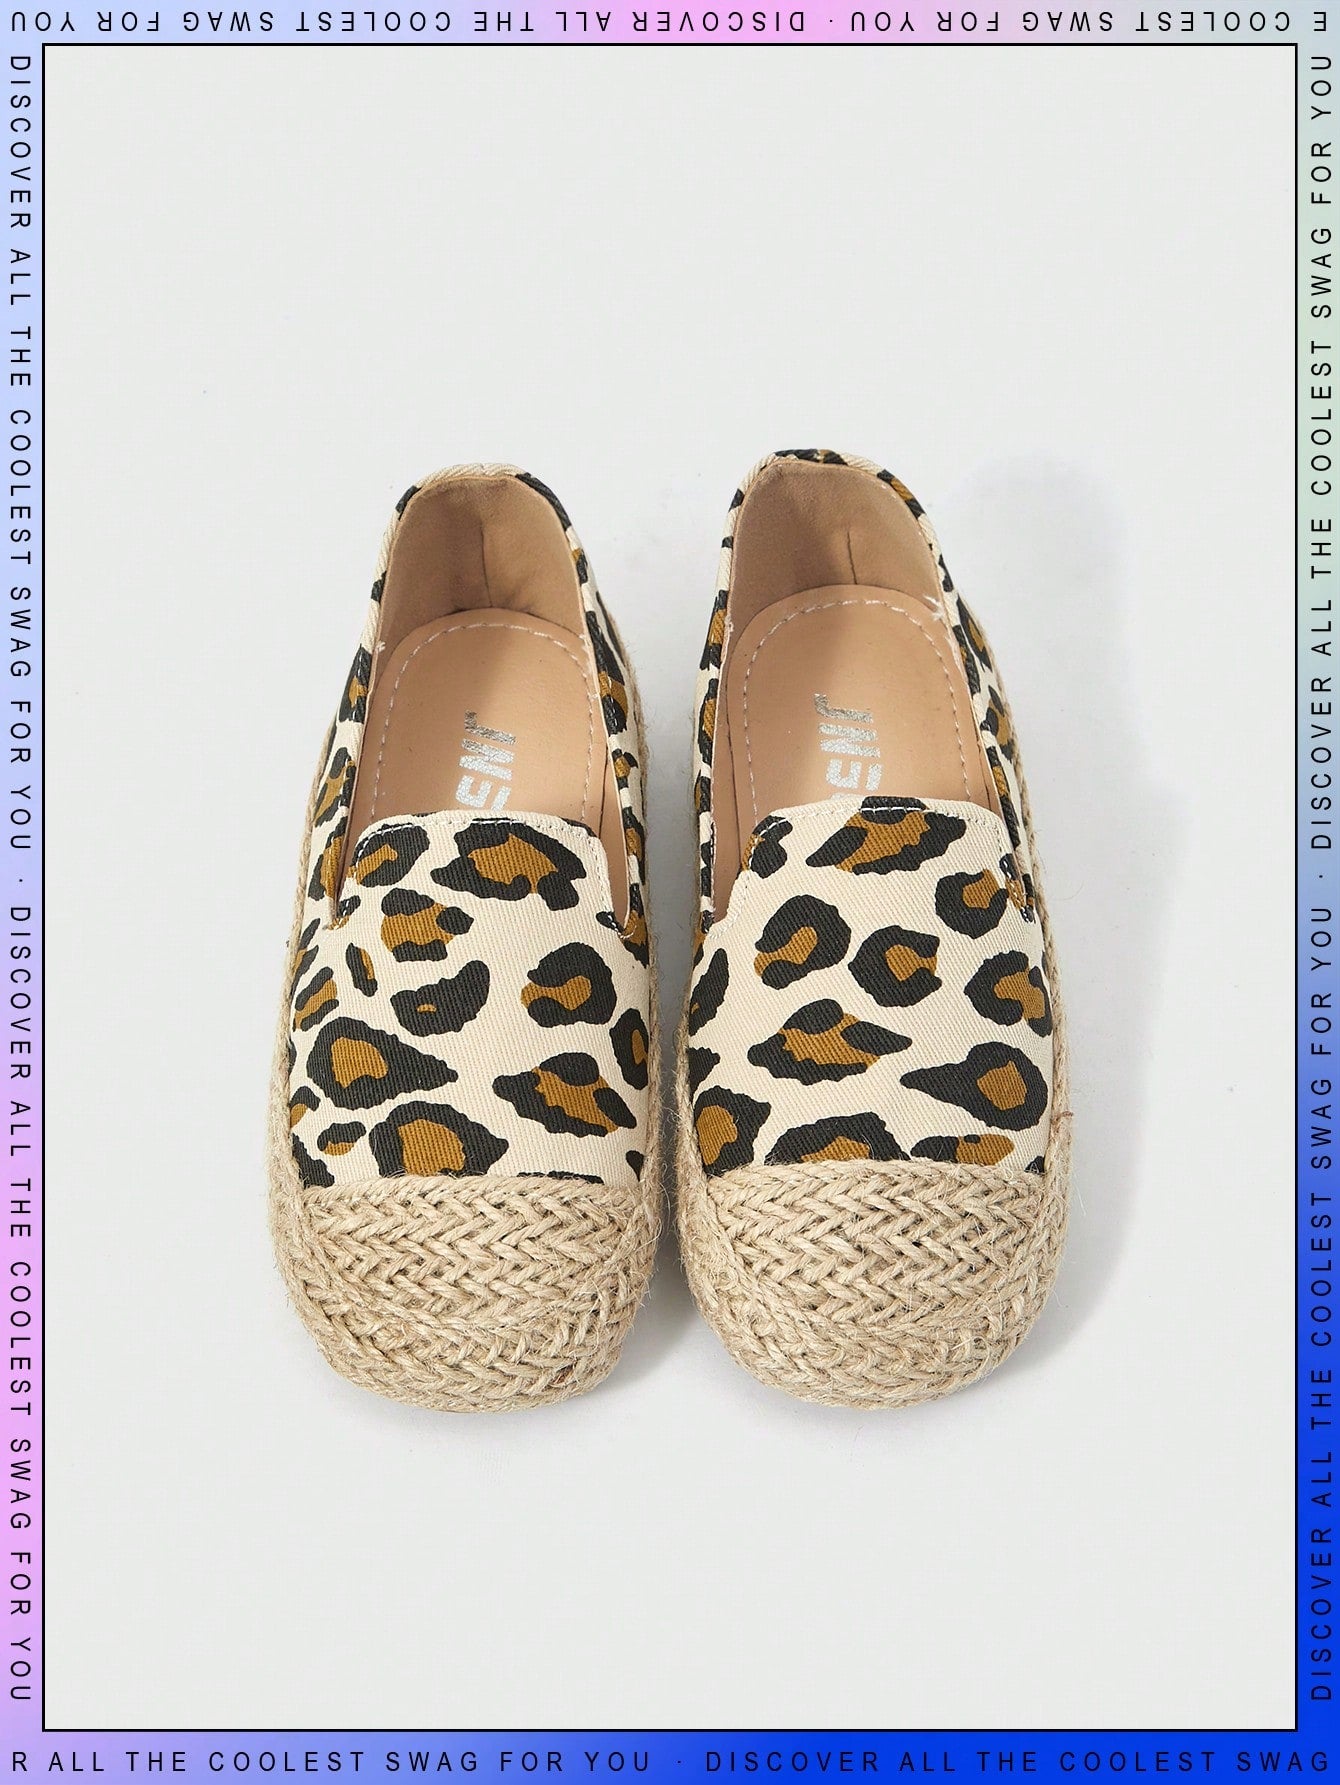 Hemp Rope Shoes Cute Leopard Print Comfortable Breathable Non-slip Outdoor Travel Girls Flat Shoes